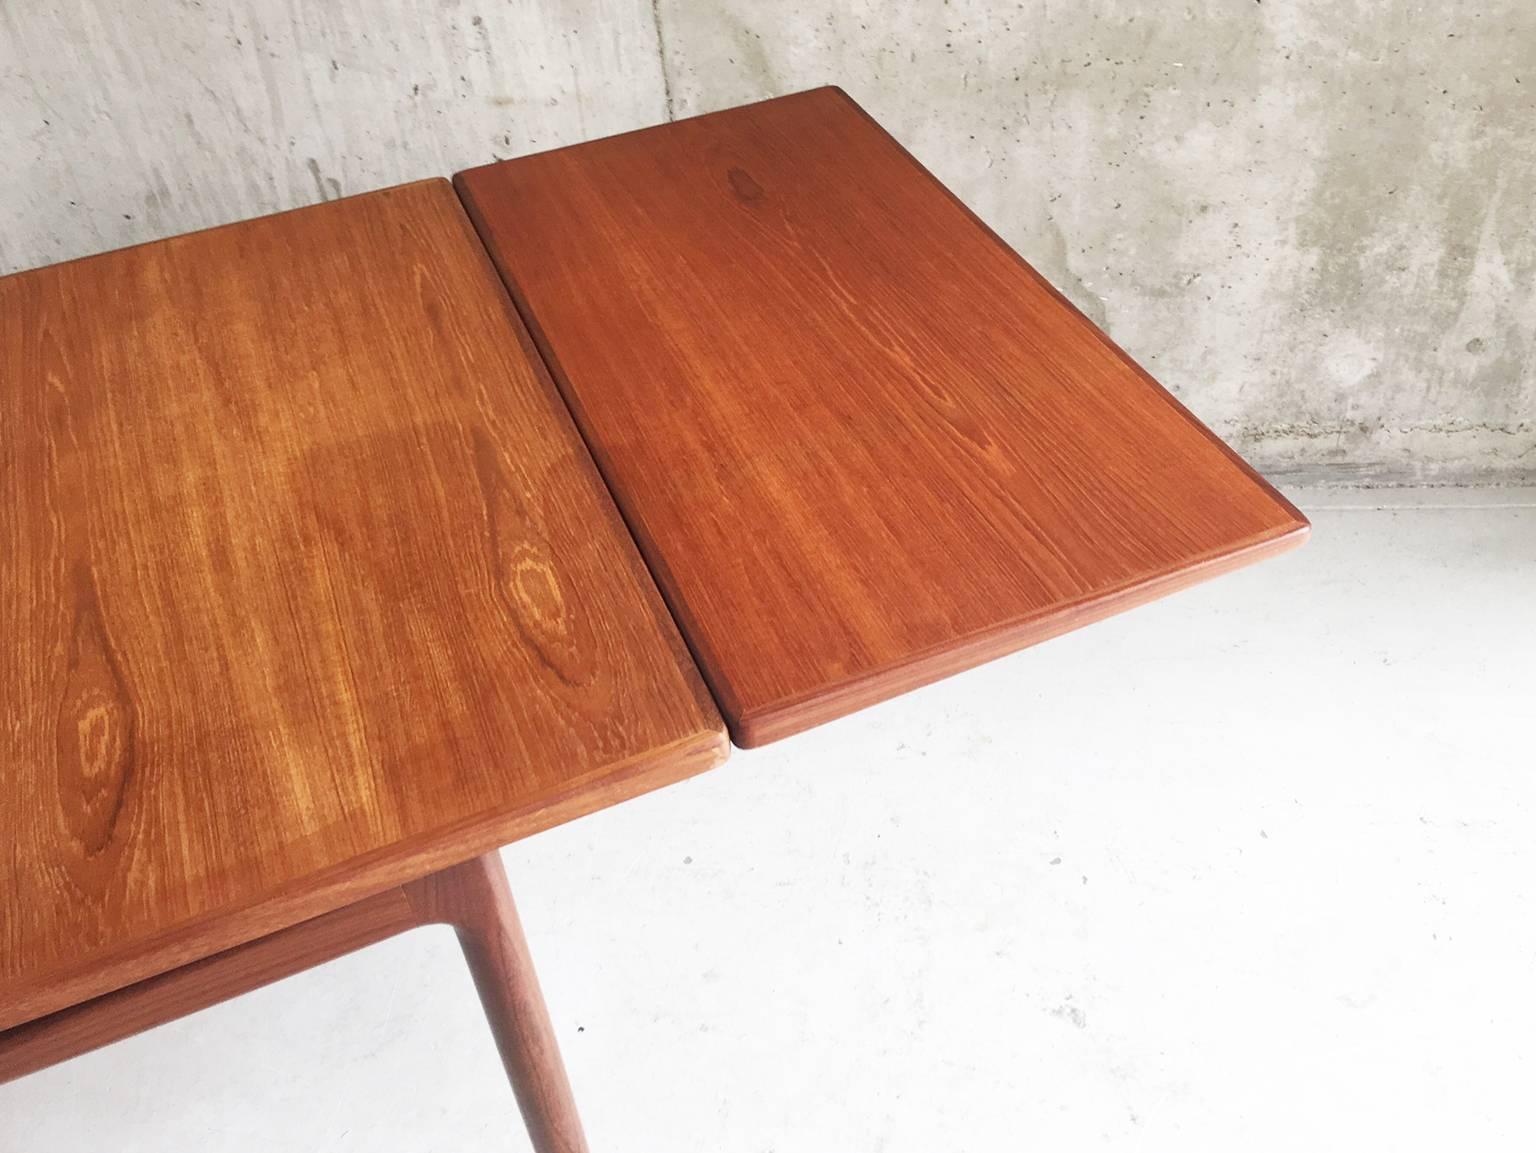 Ib Kofod-Larsen for G-Plan’s Danish Range 1960s Teak Extendable Dining Table In Excellent Condition For Sale In London, GB